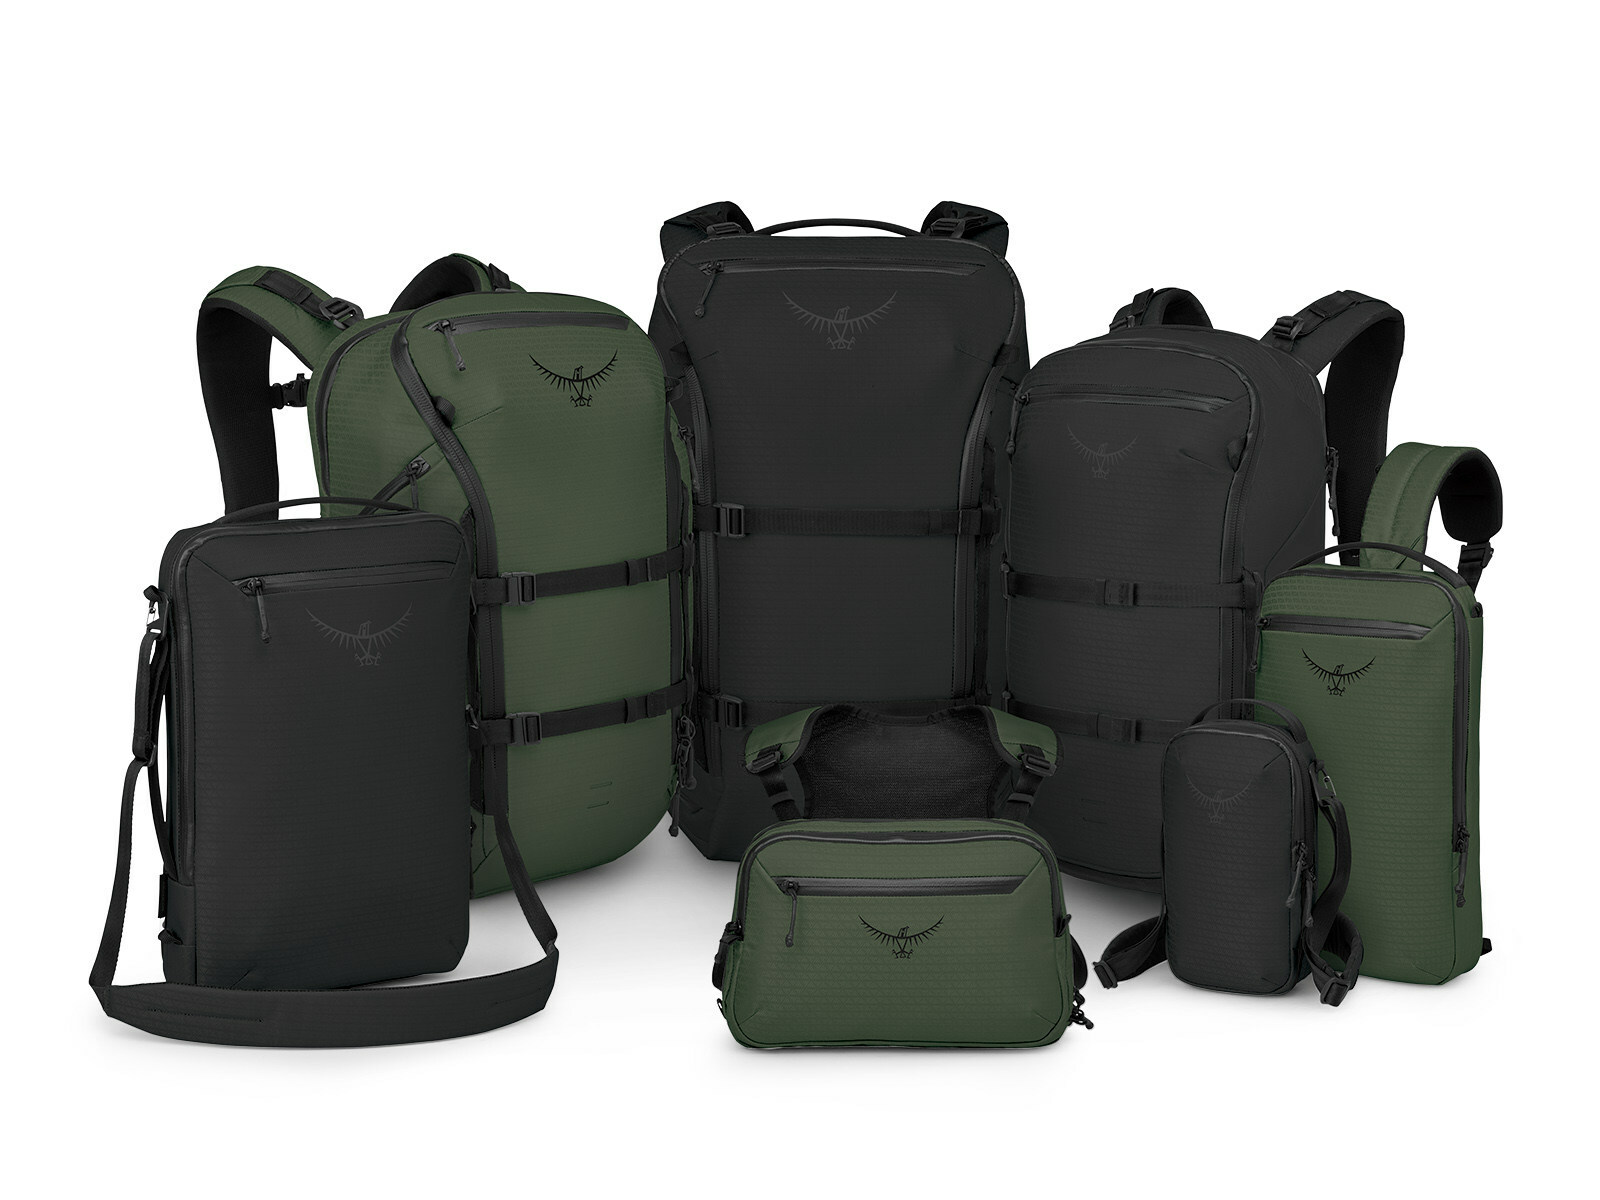 Osprey Packs has revolutionised its approach to the everyday carry category with the launch of Archeon, a seven-piece, modular pack system.